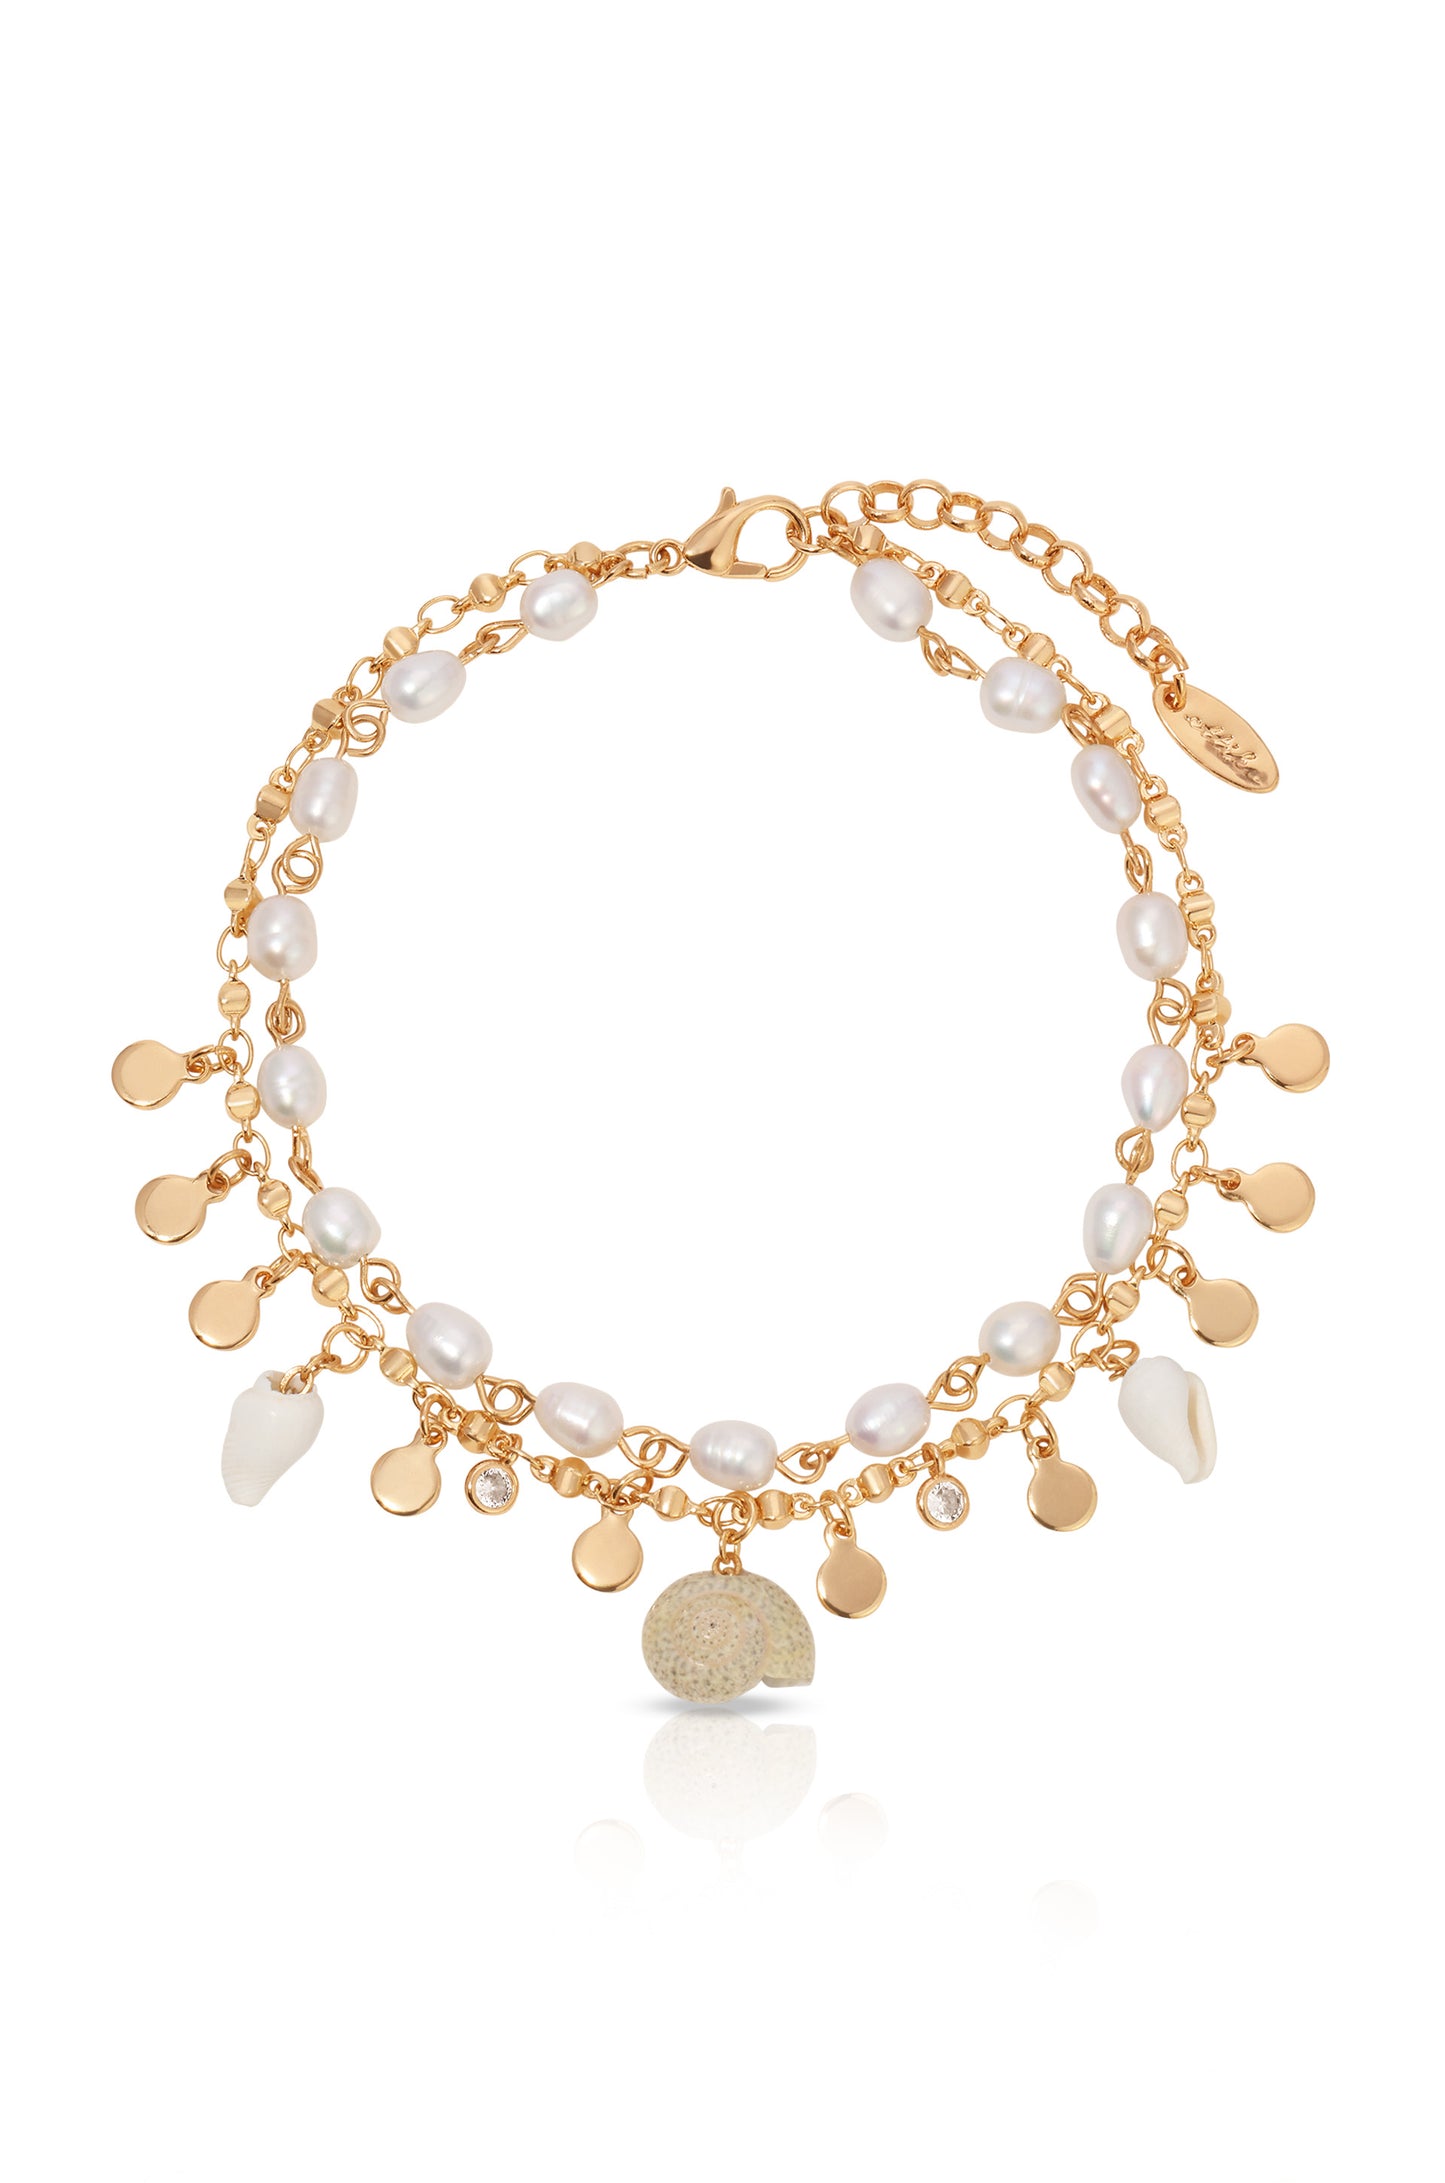 Layered Beach Treasures Anklet